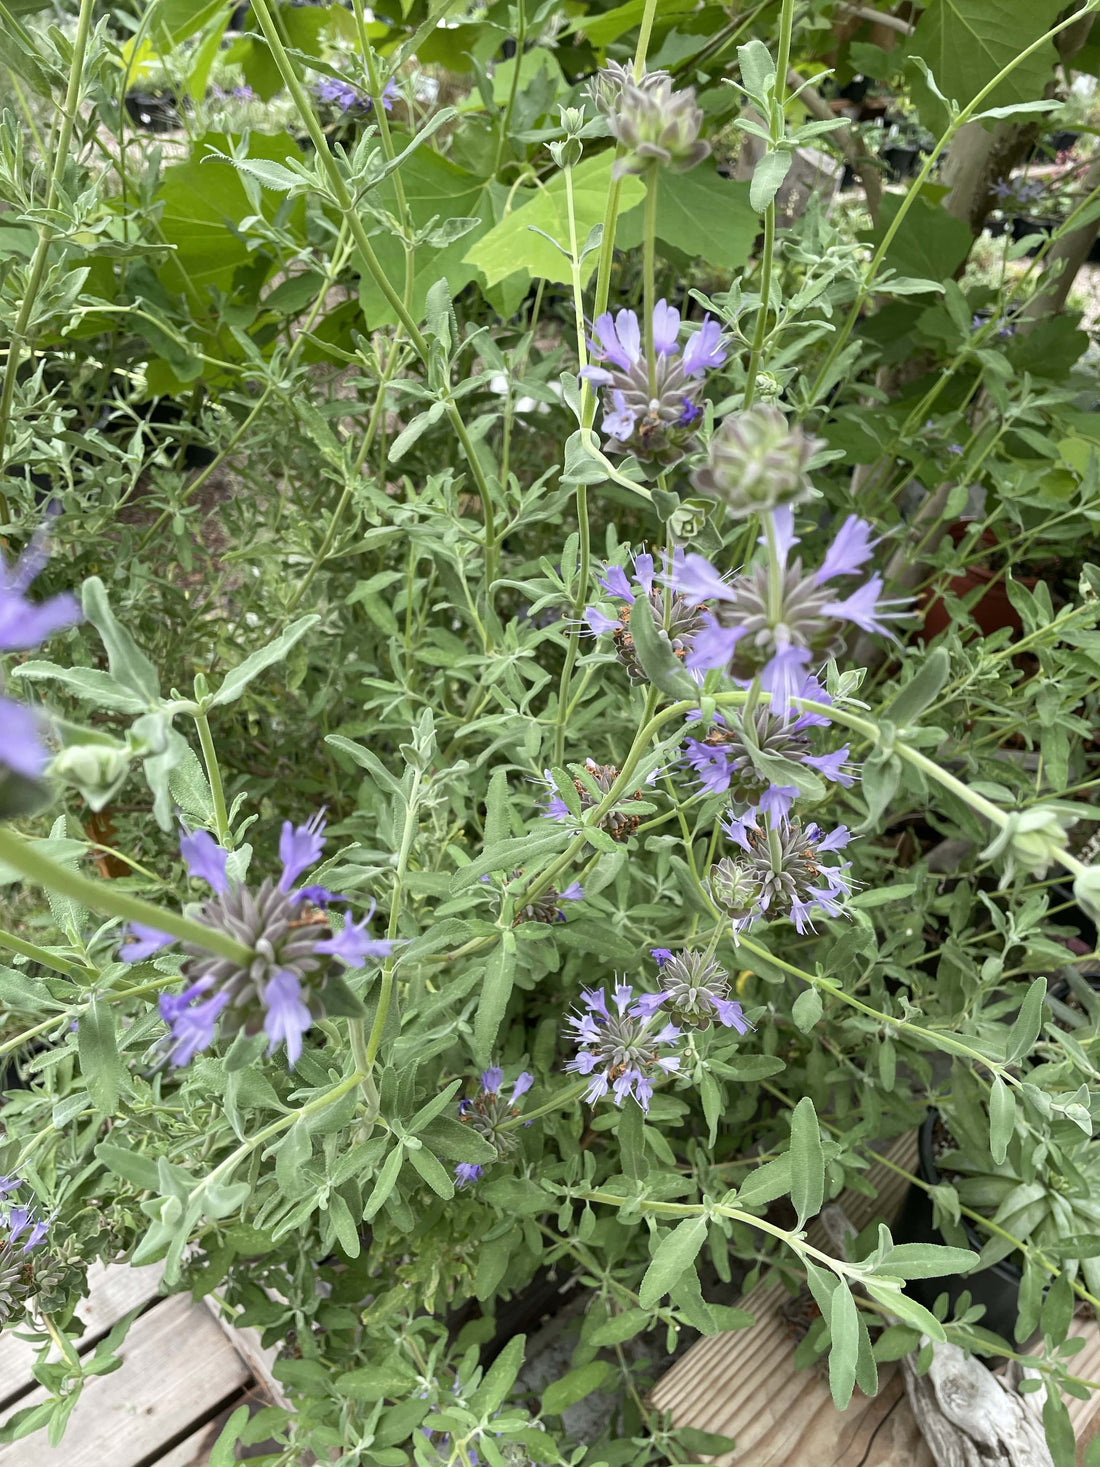 Salvia 'Allen Chickering' purple flowers and foliage